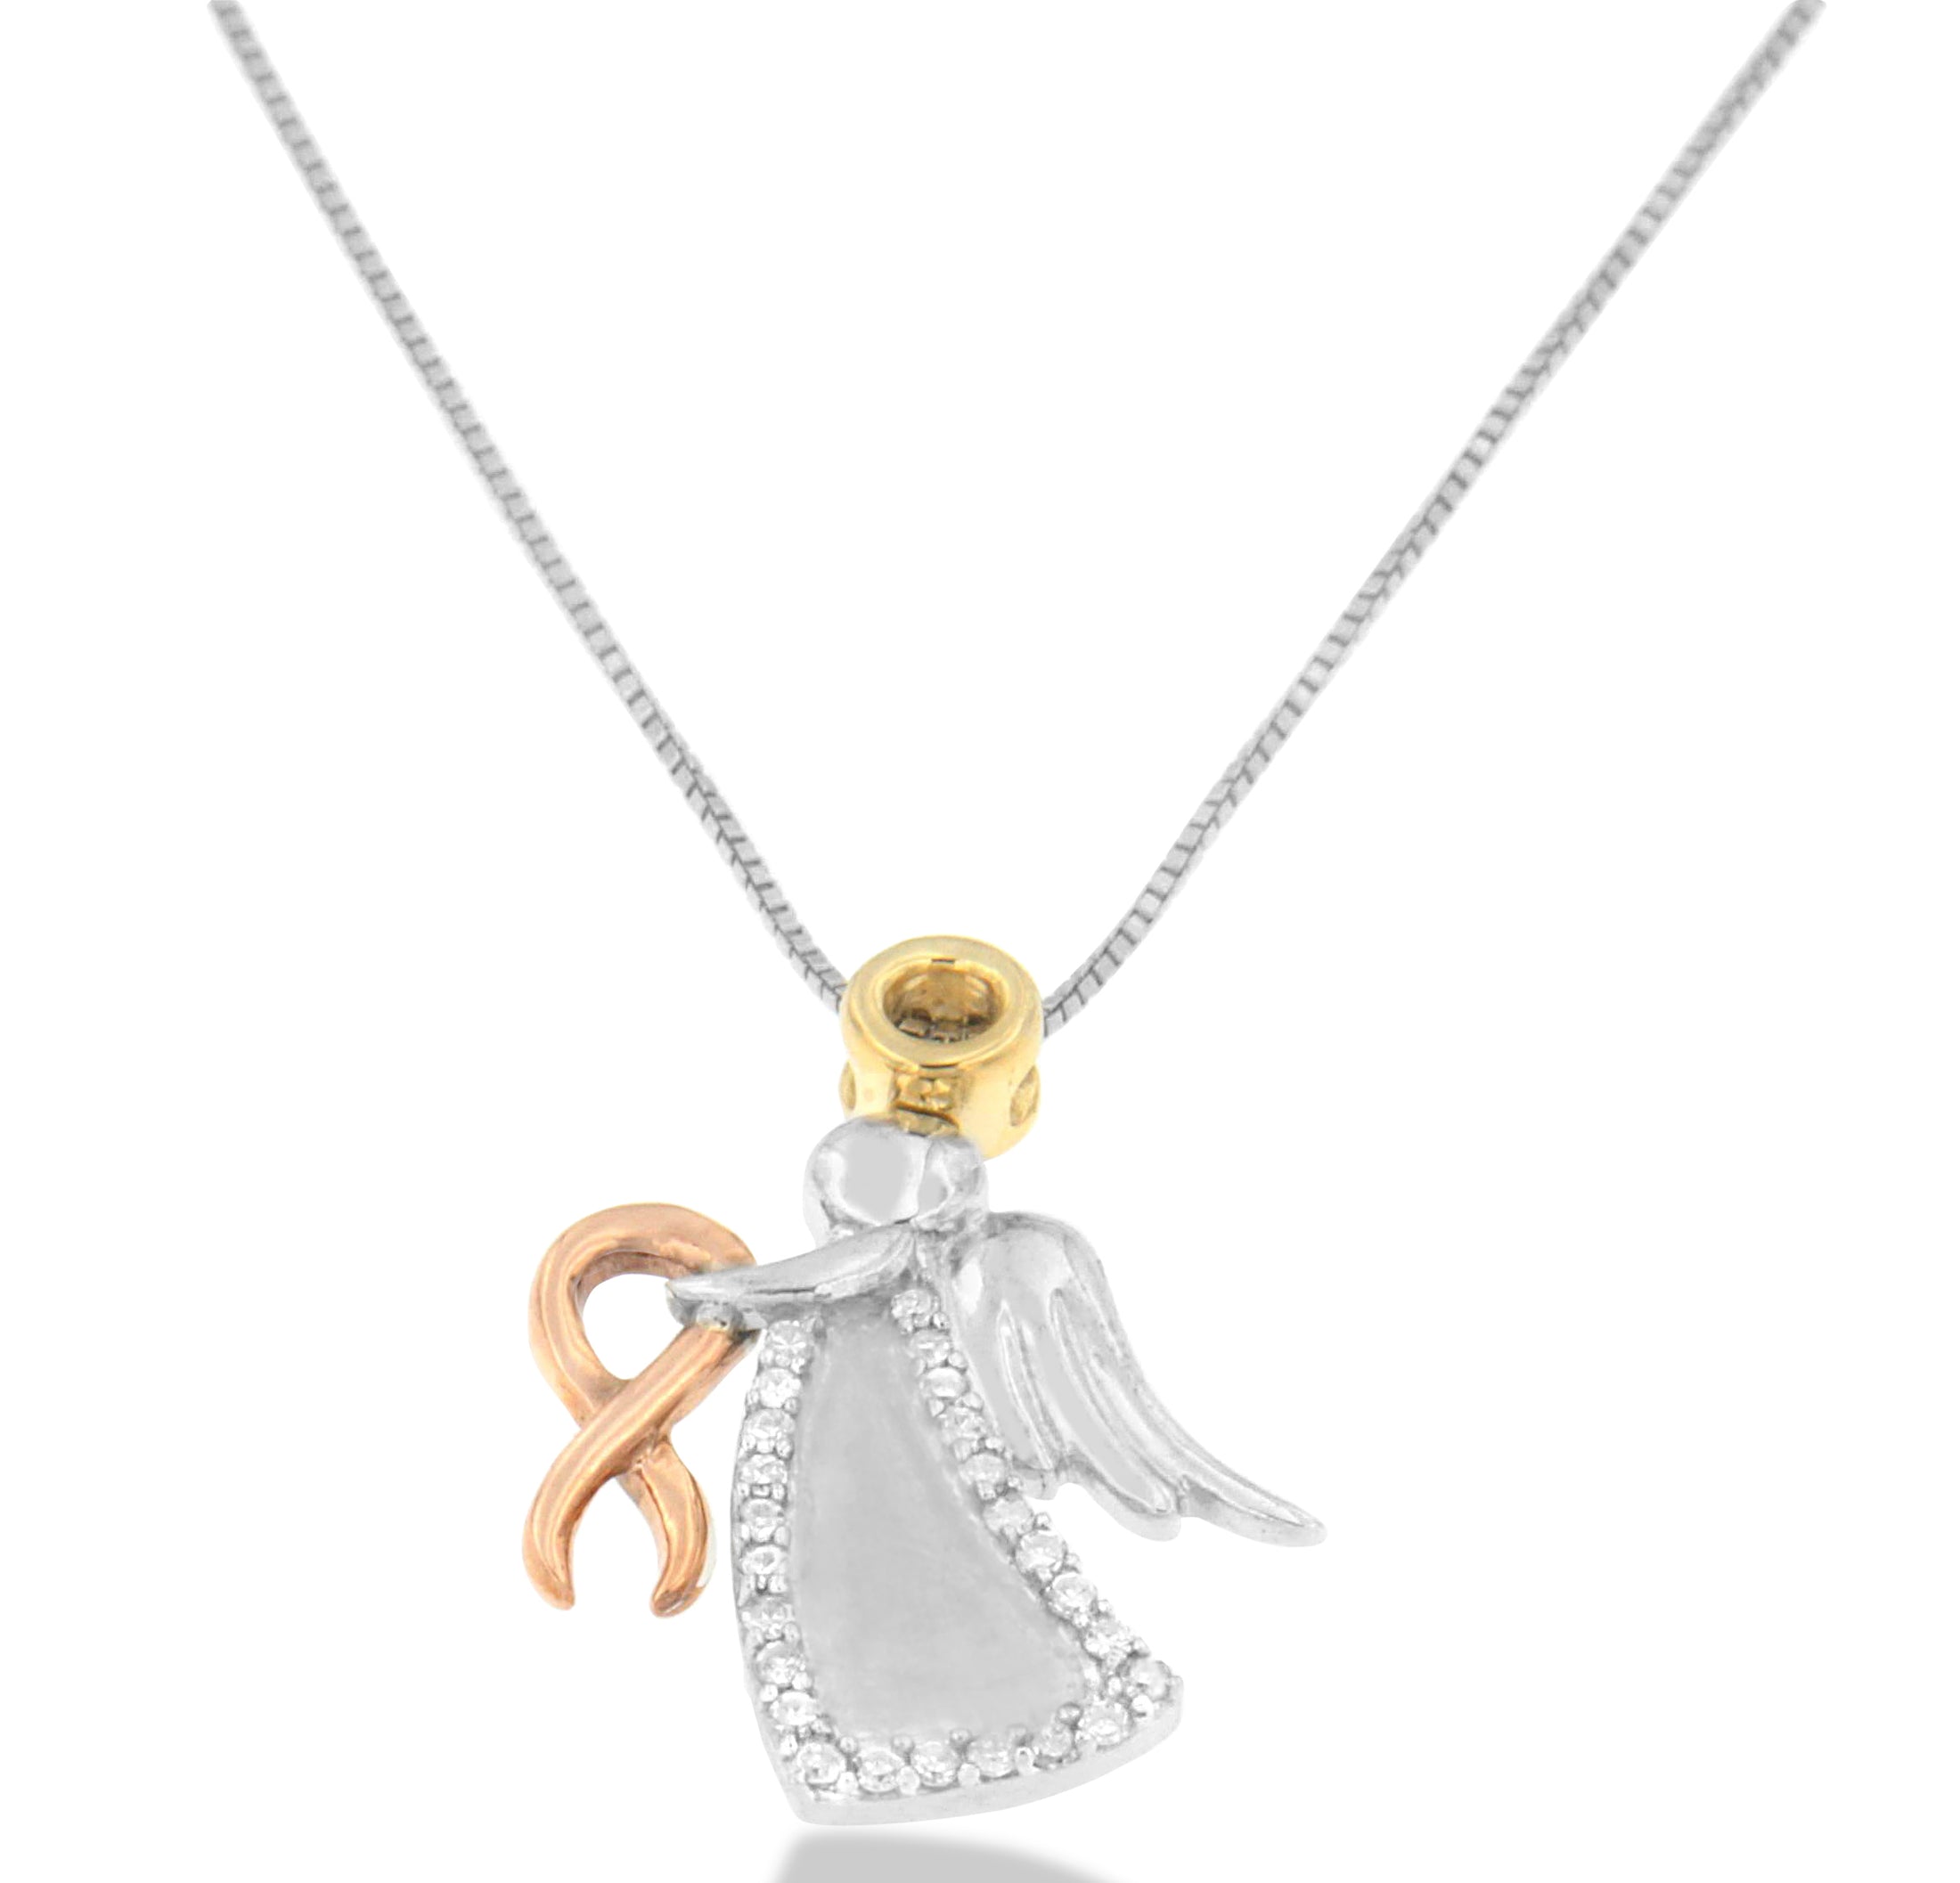 10K Tri-Color Gold Diamond-Accented Angel Awareness Ribbon Pendant Necklace